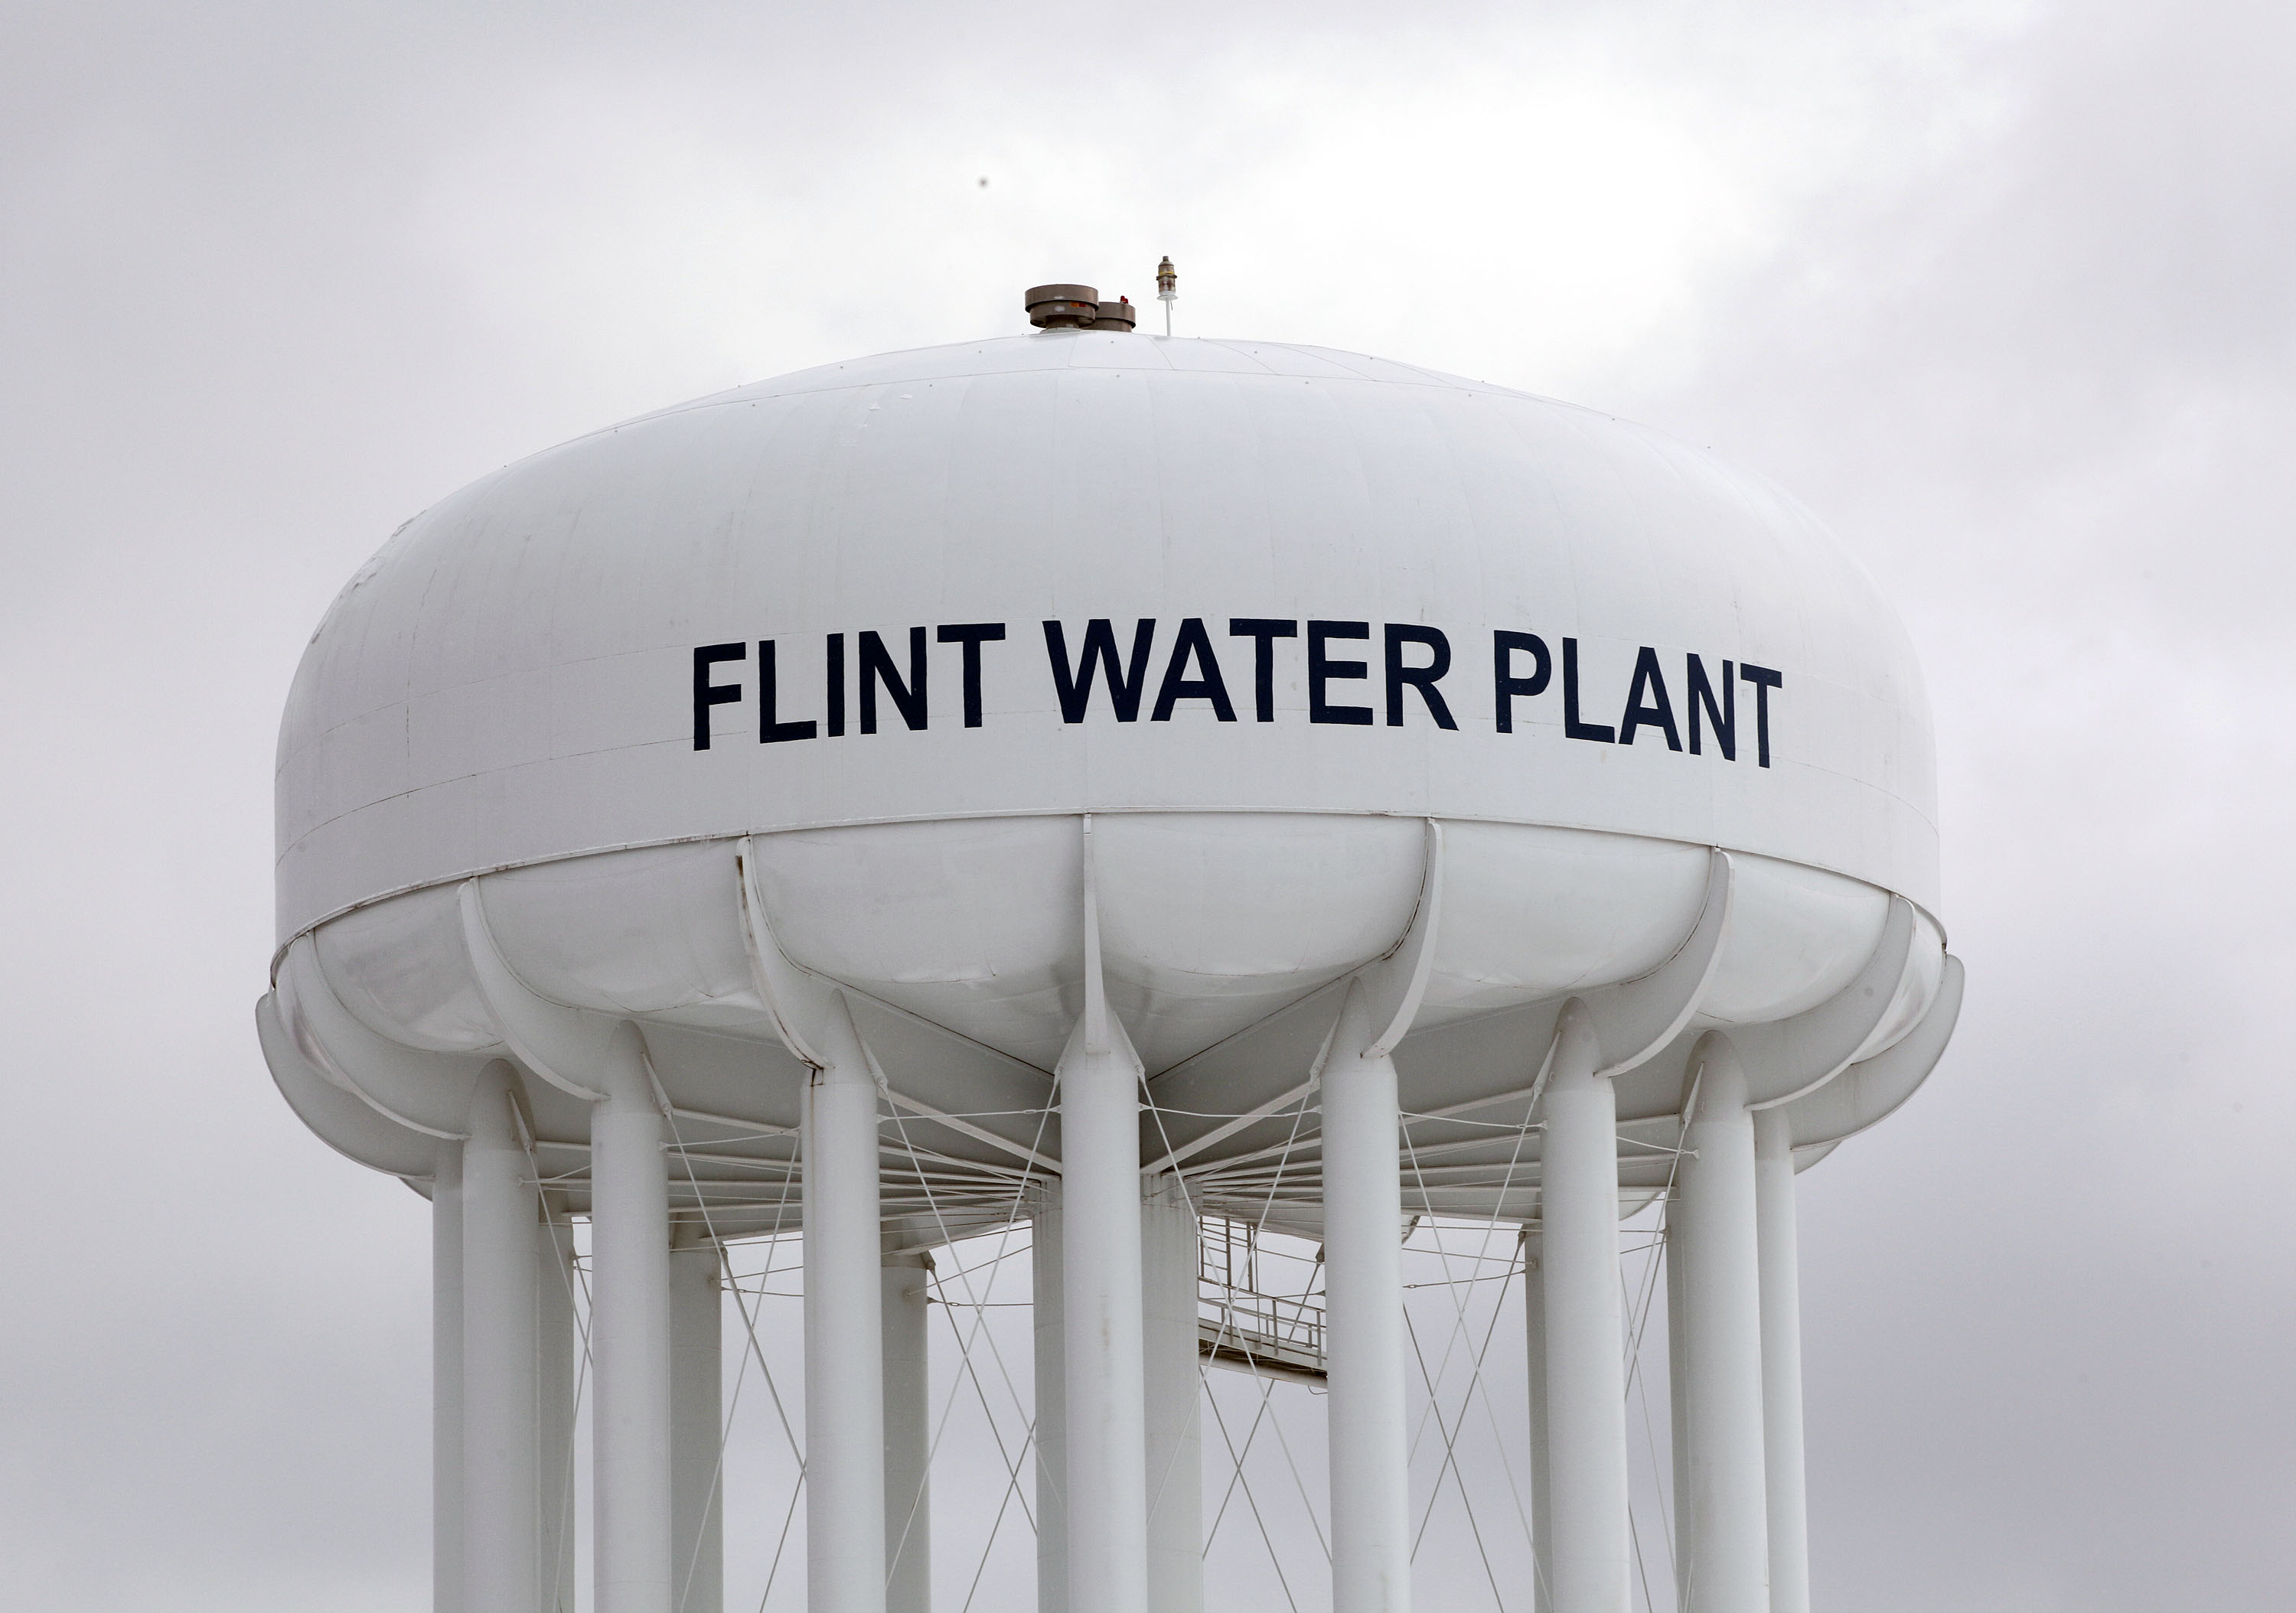 CDC Flint water crisis "entirely preventable" CBS News